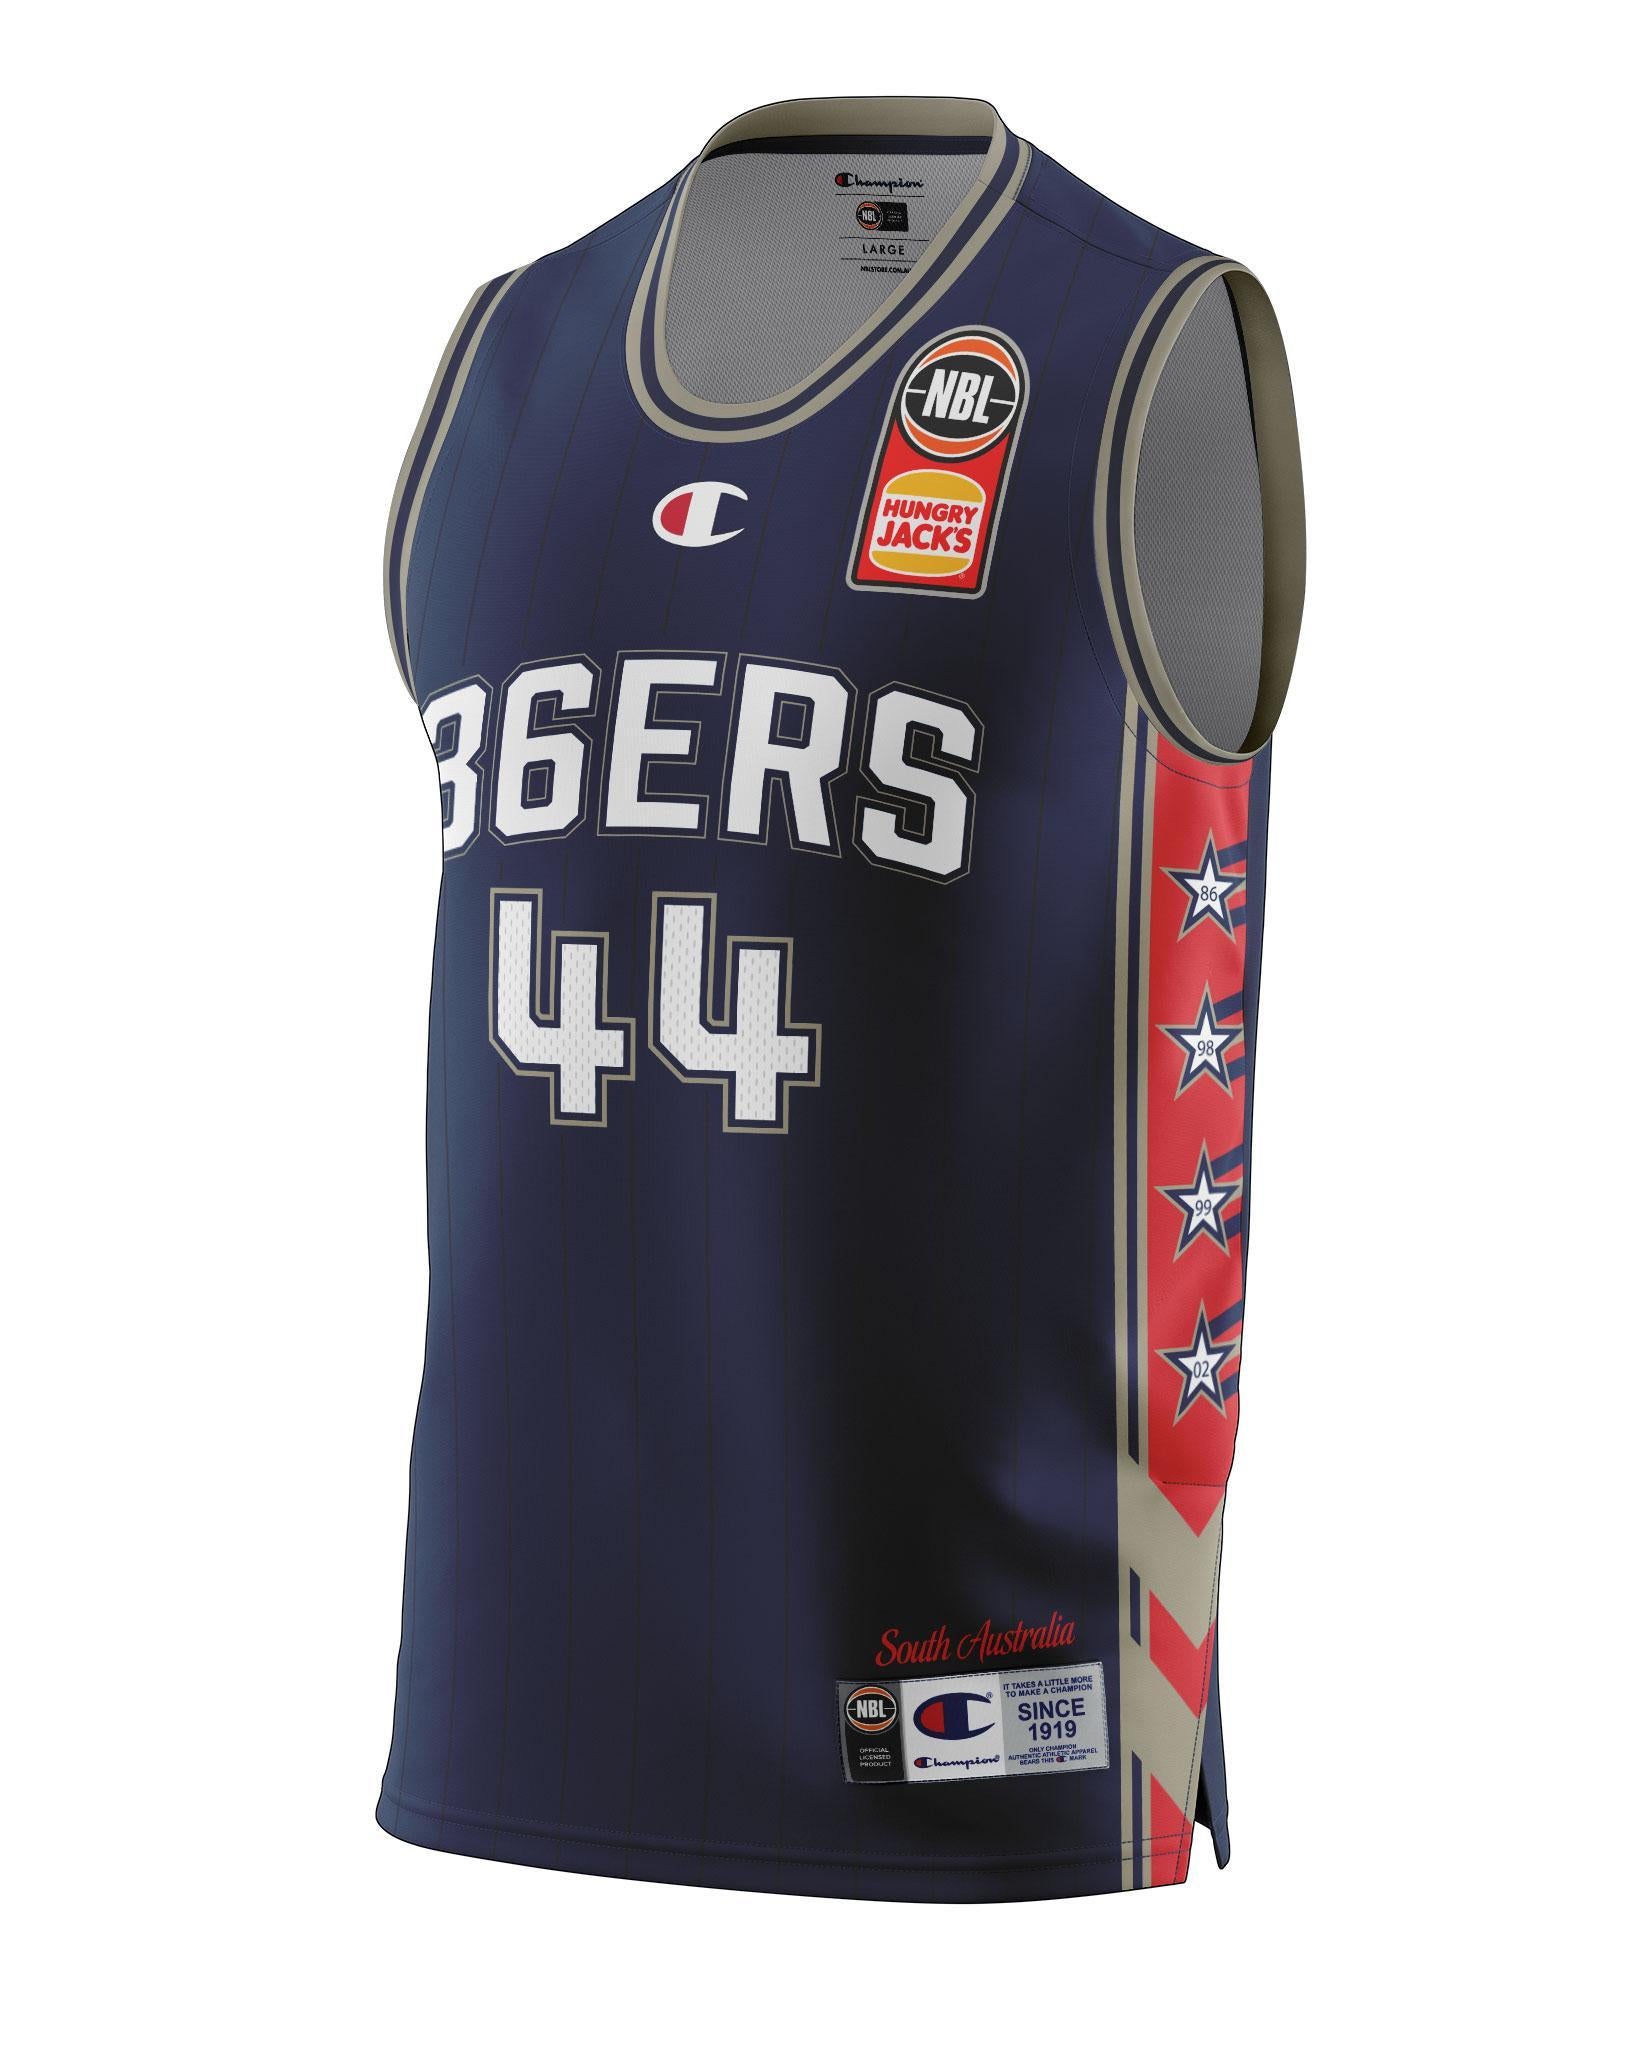 Adelaide 36ers 2021/22 Authentic Home Youth Jersey - Sunday Dech - Adelaide 36ers